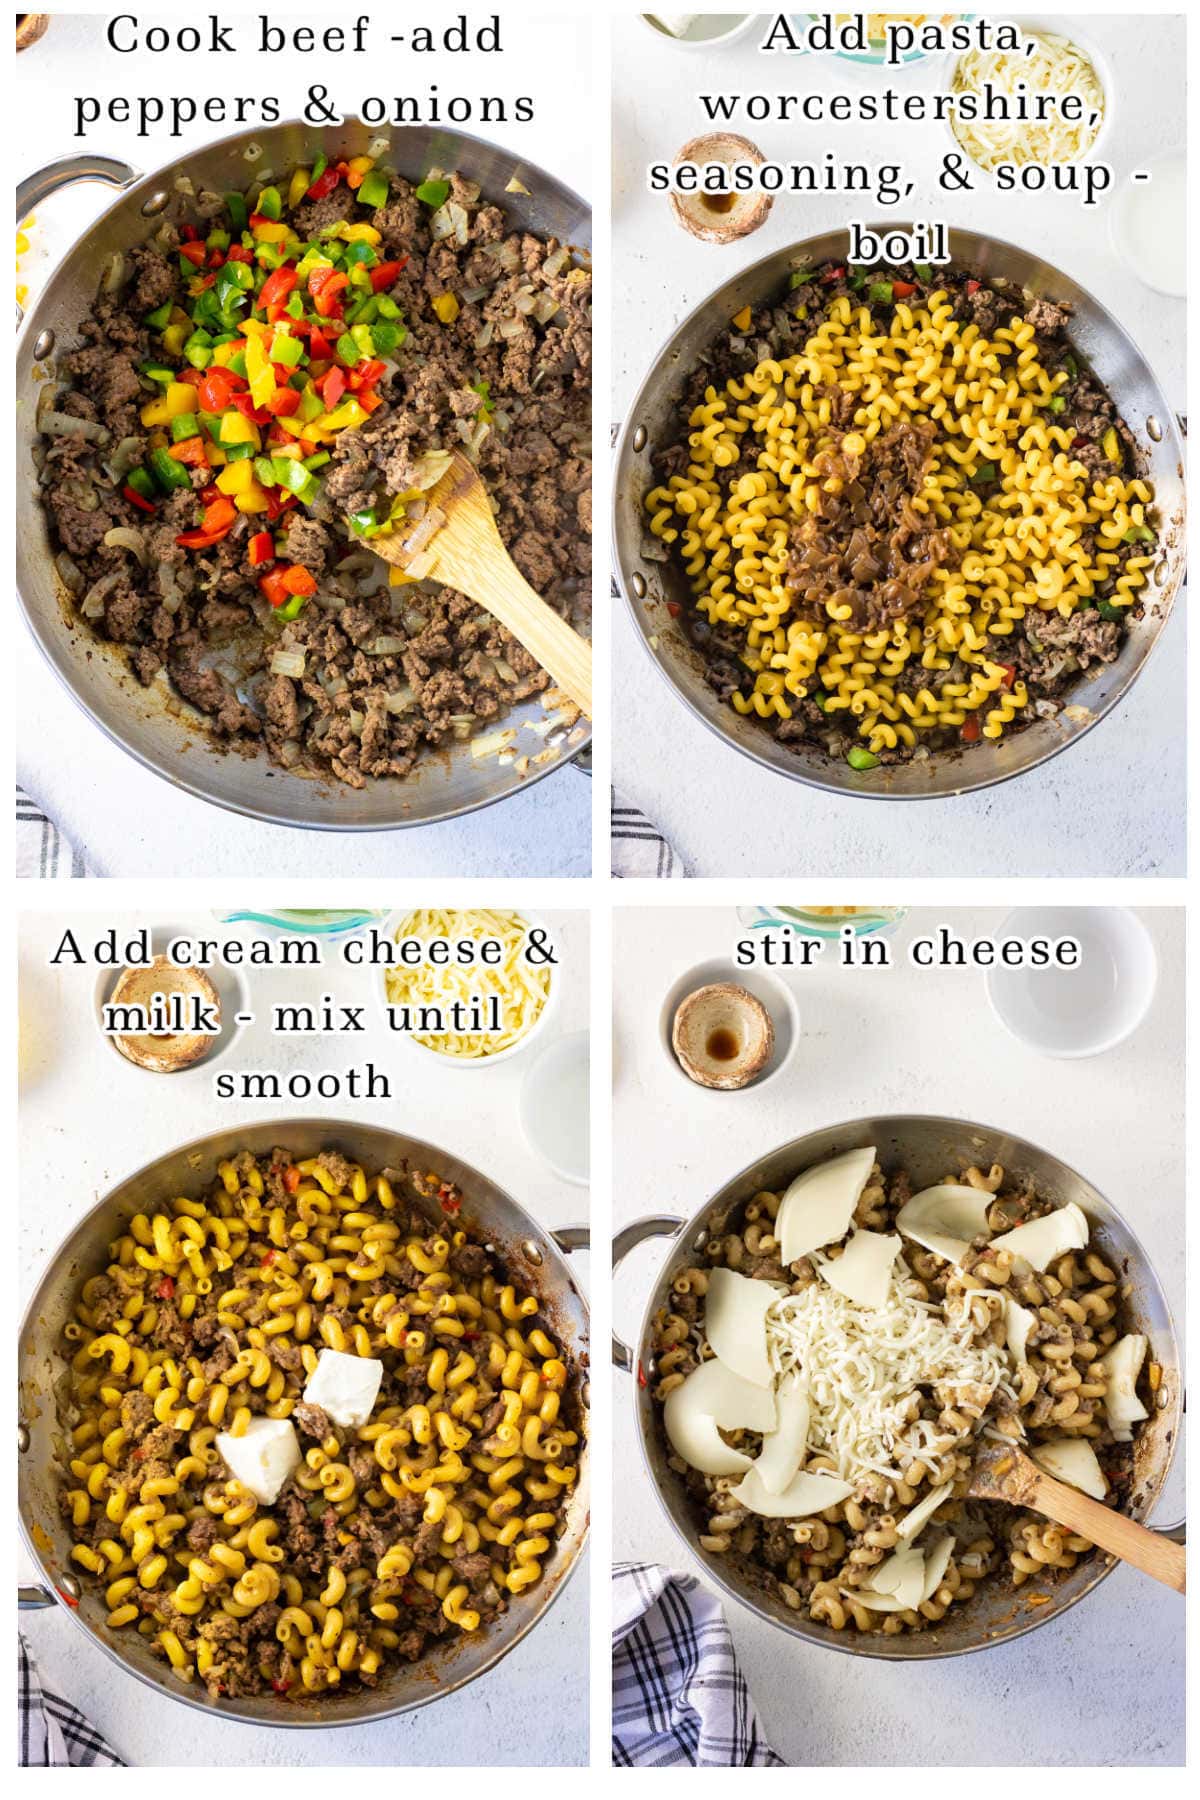 Step by step images for making philly cheesesteak pasta dinner.